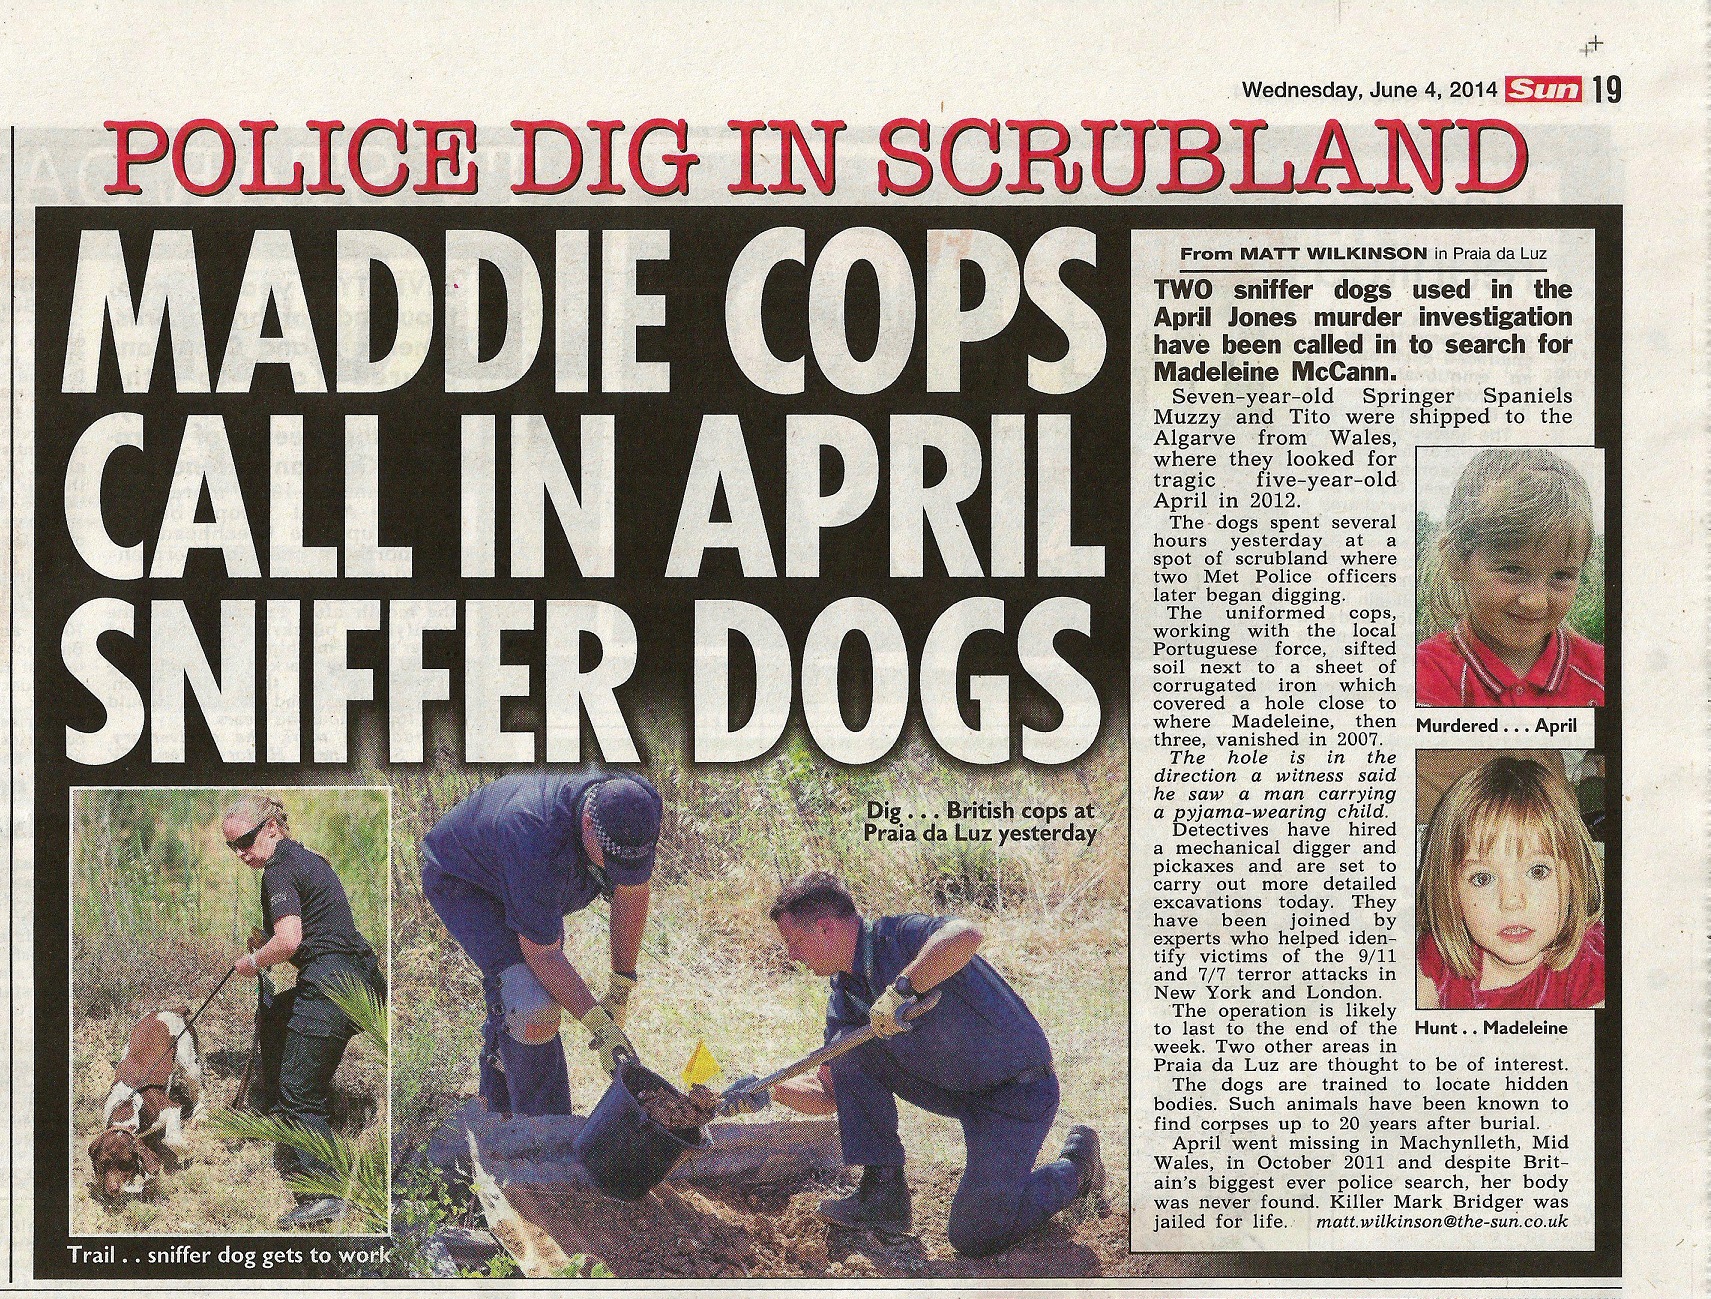 Maddie cops call in April sniffer dogs - The Sun, 04 June 2014 (paper edition, page 19)